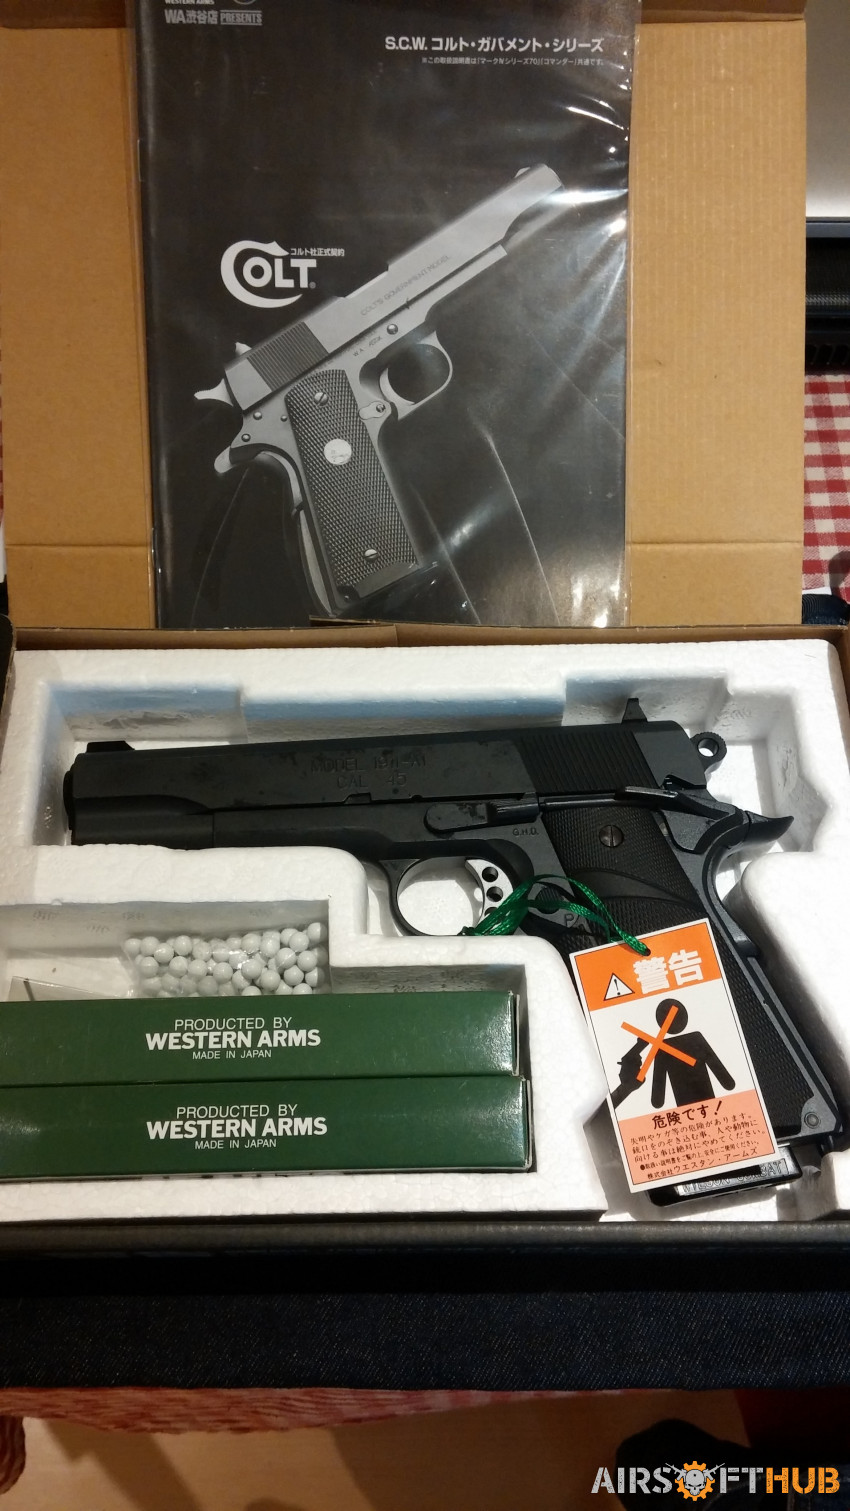 Western Arms Colt MEU pistol - Used airsoft equipment